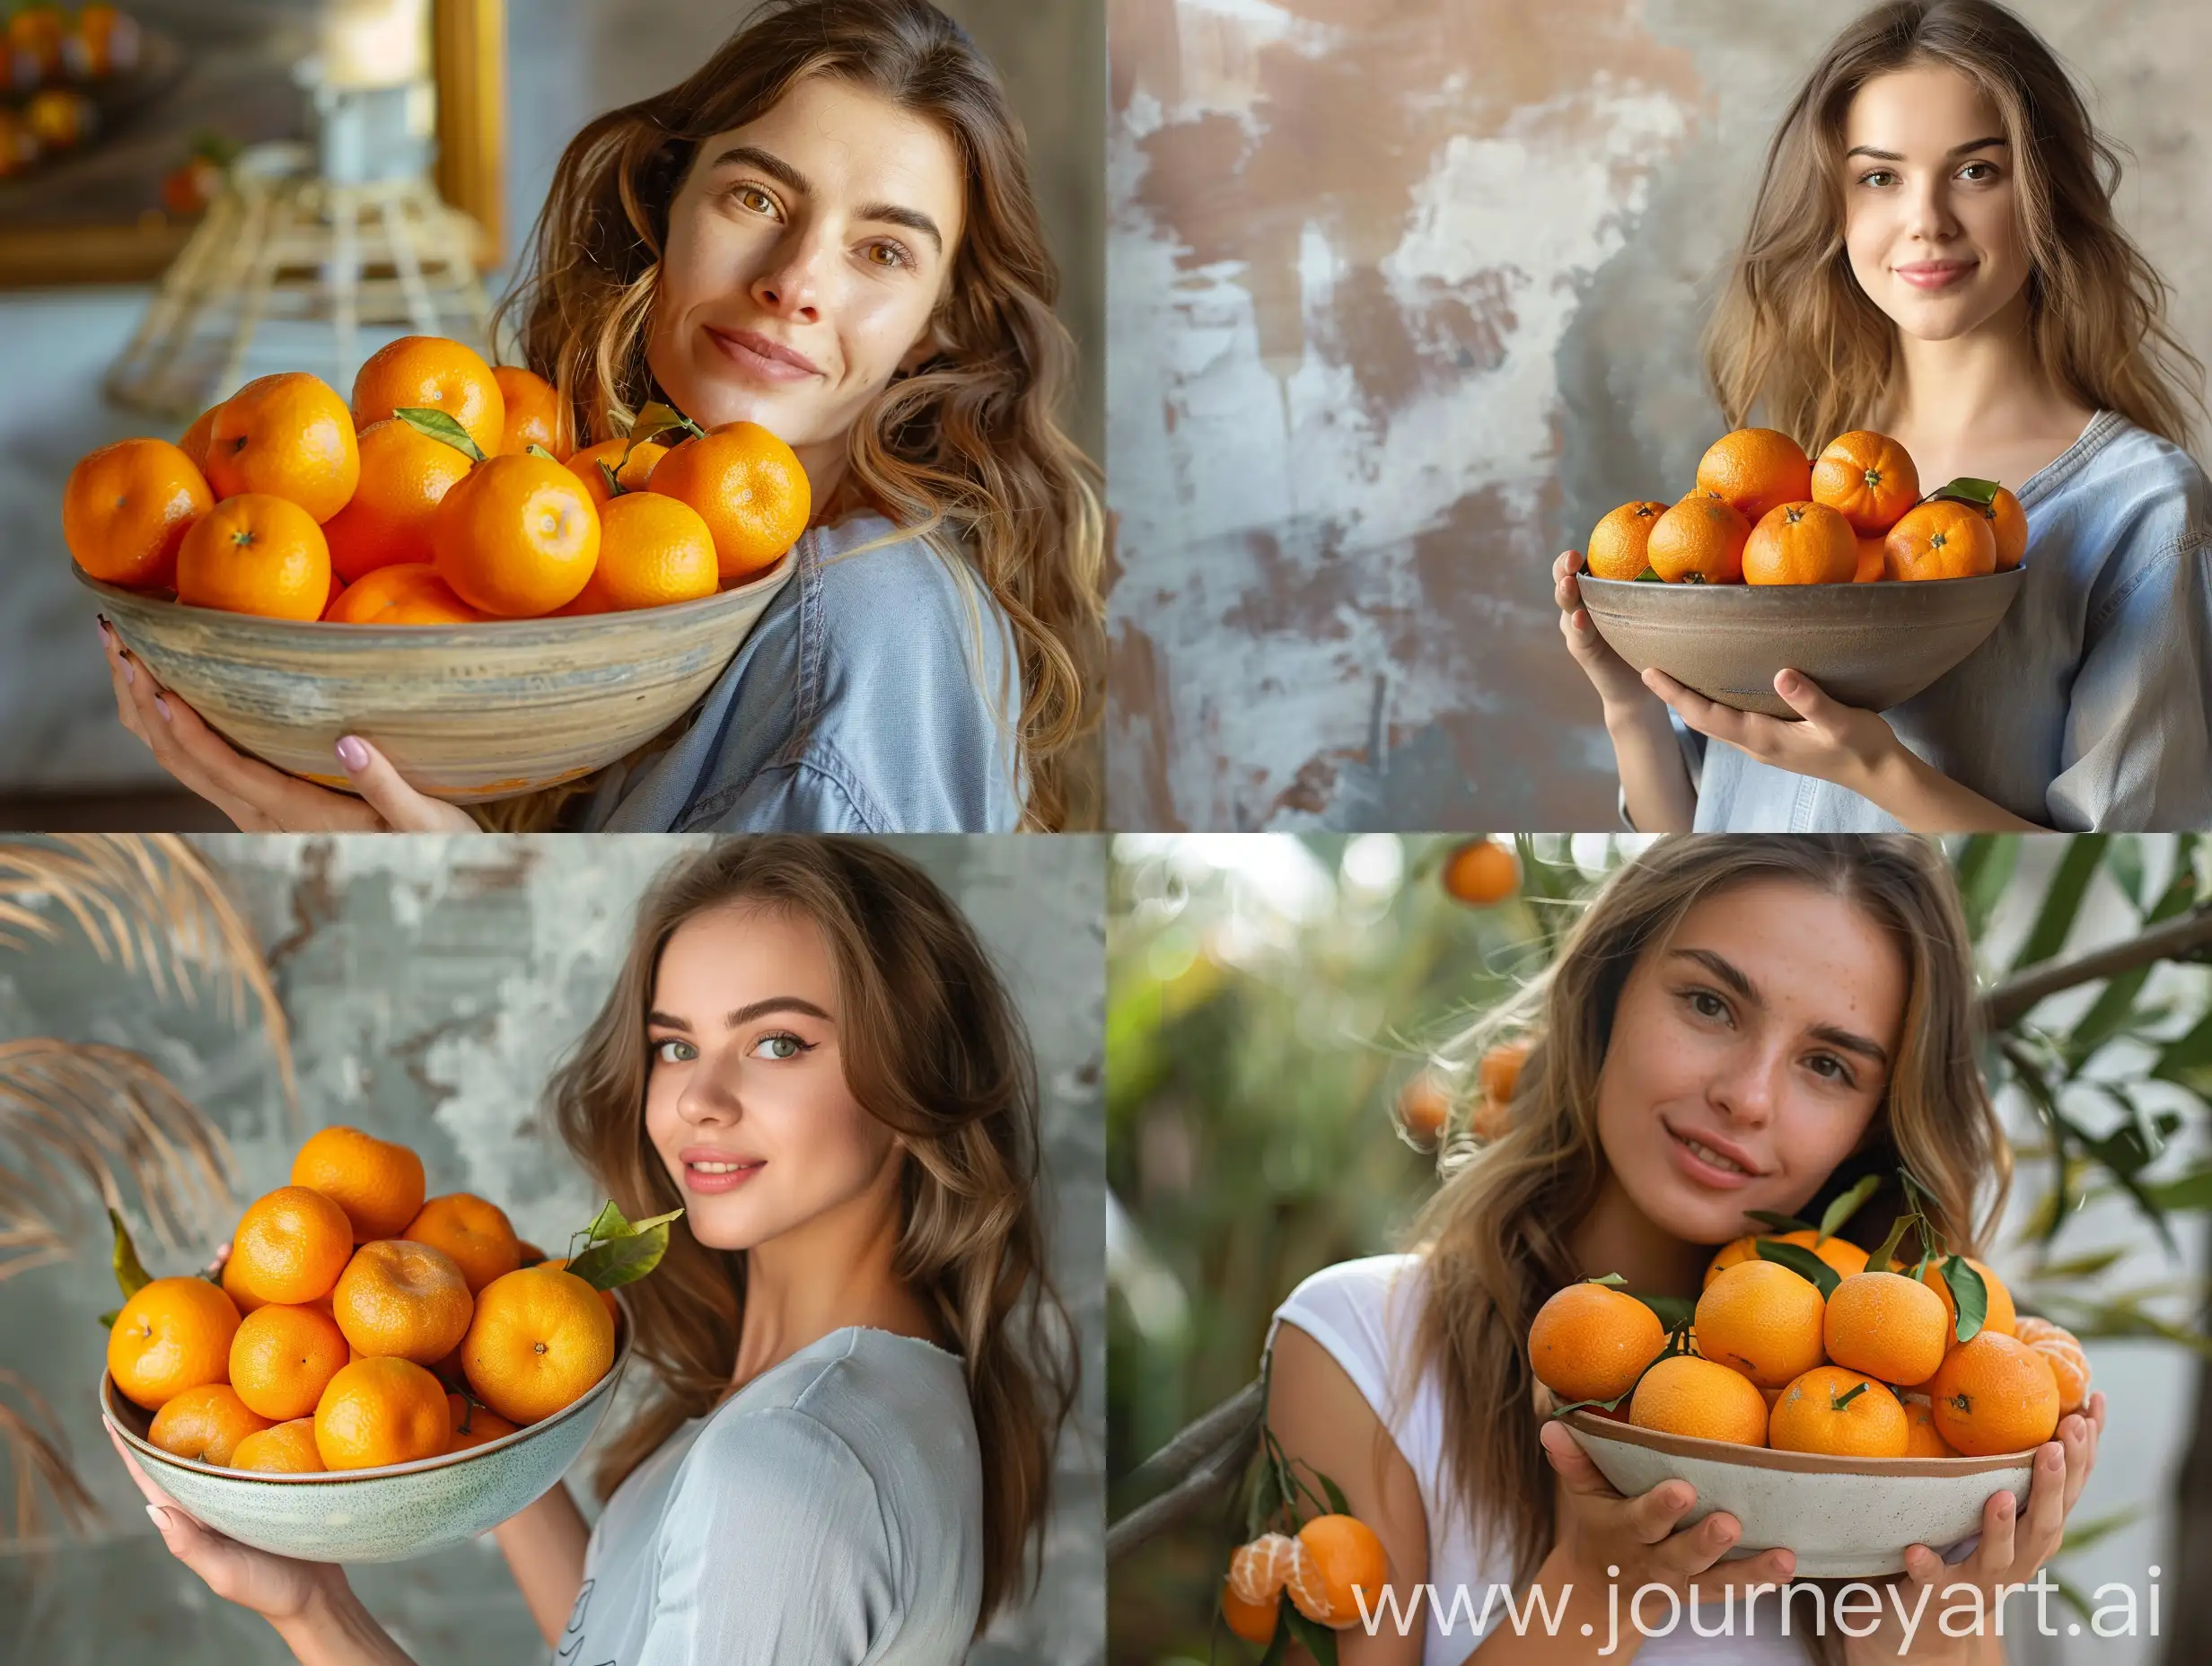 Attractive advertising photo of a woman holding a bowl full of tangerines